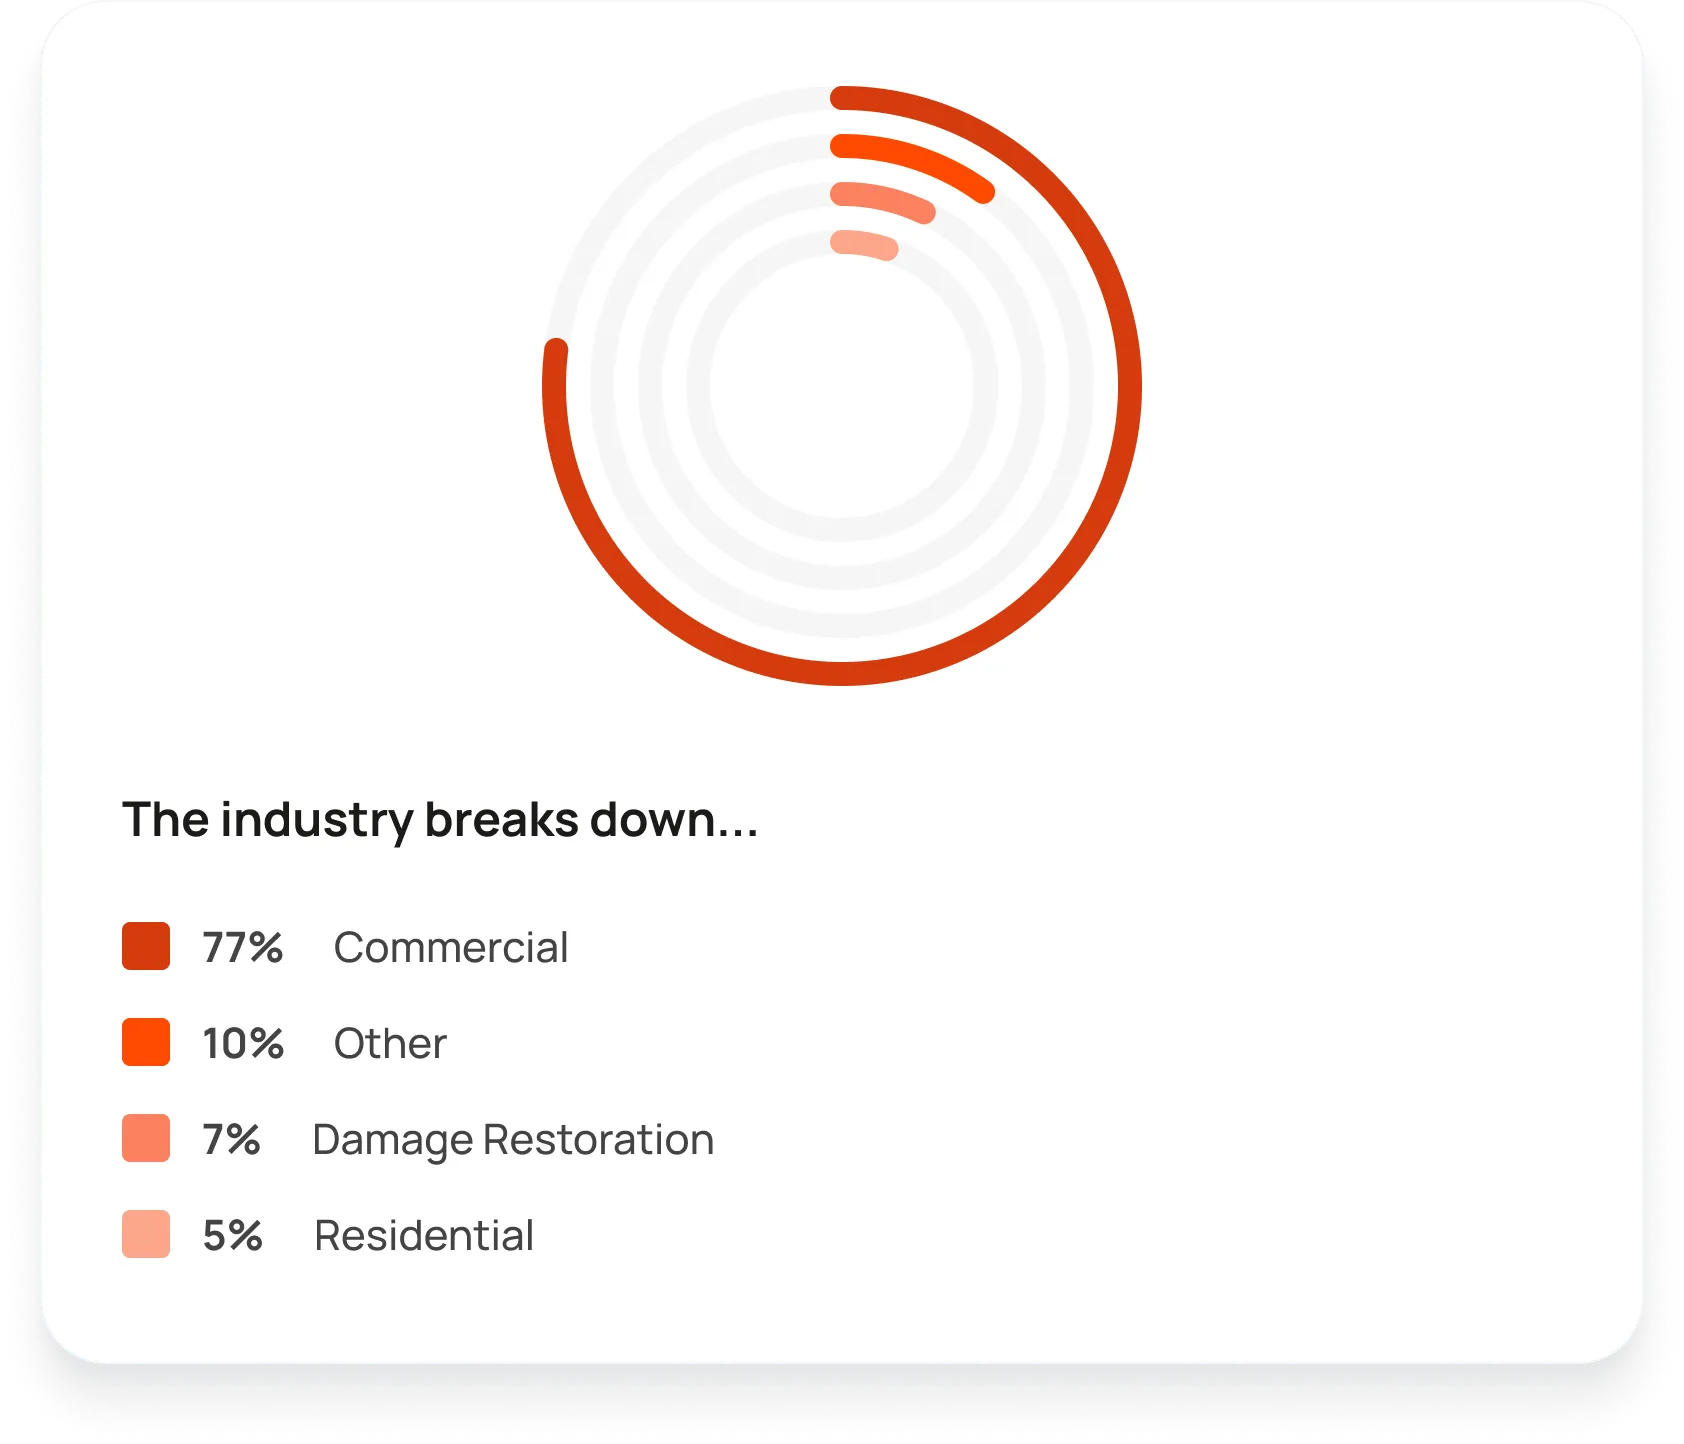 Cleaning Business industry breakdown chart